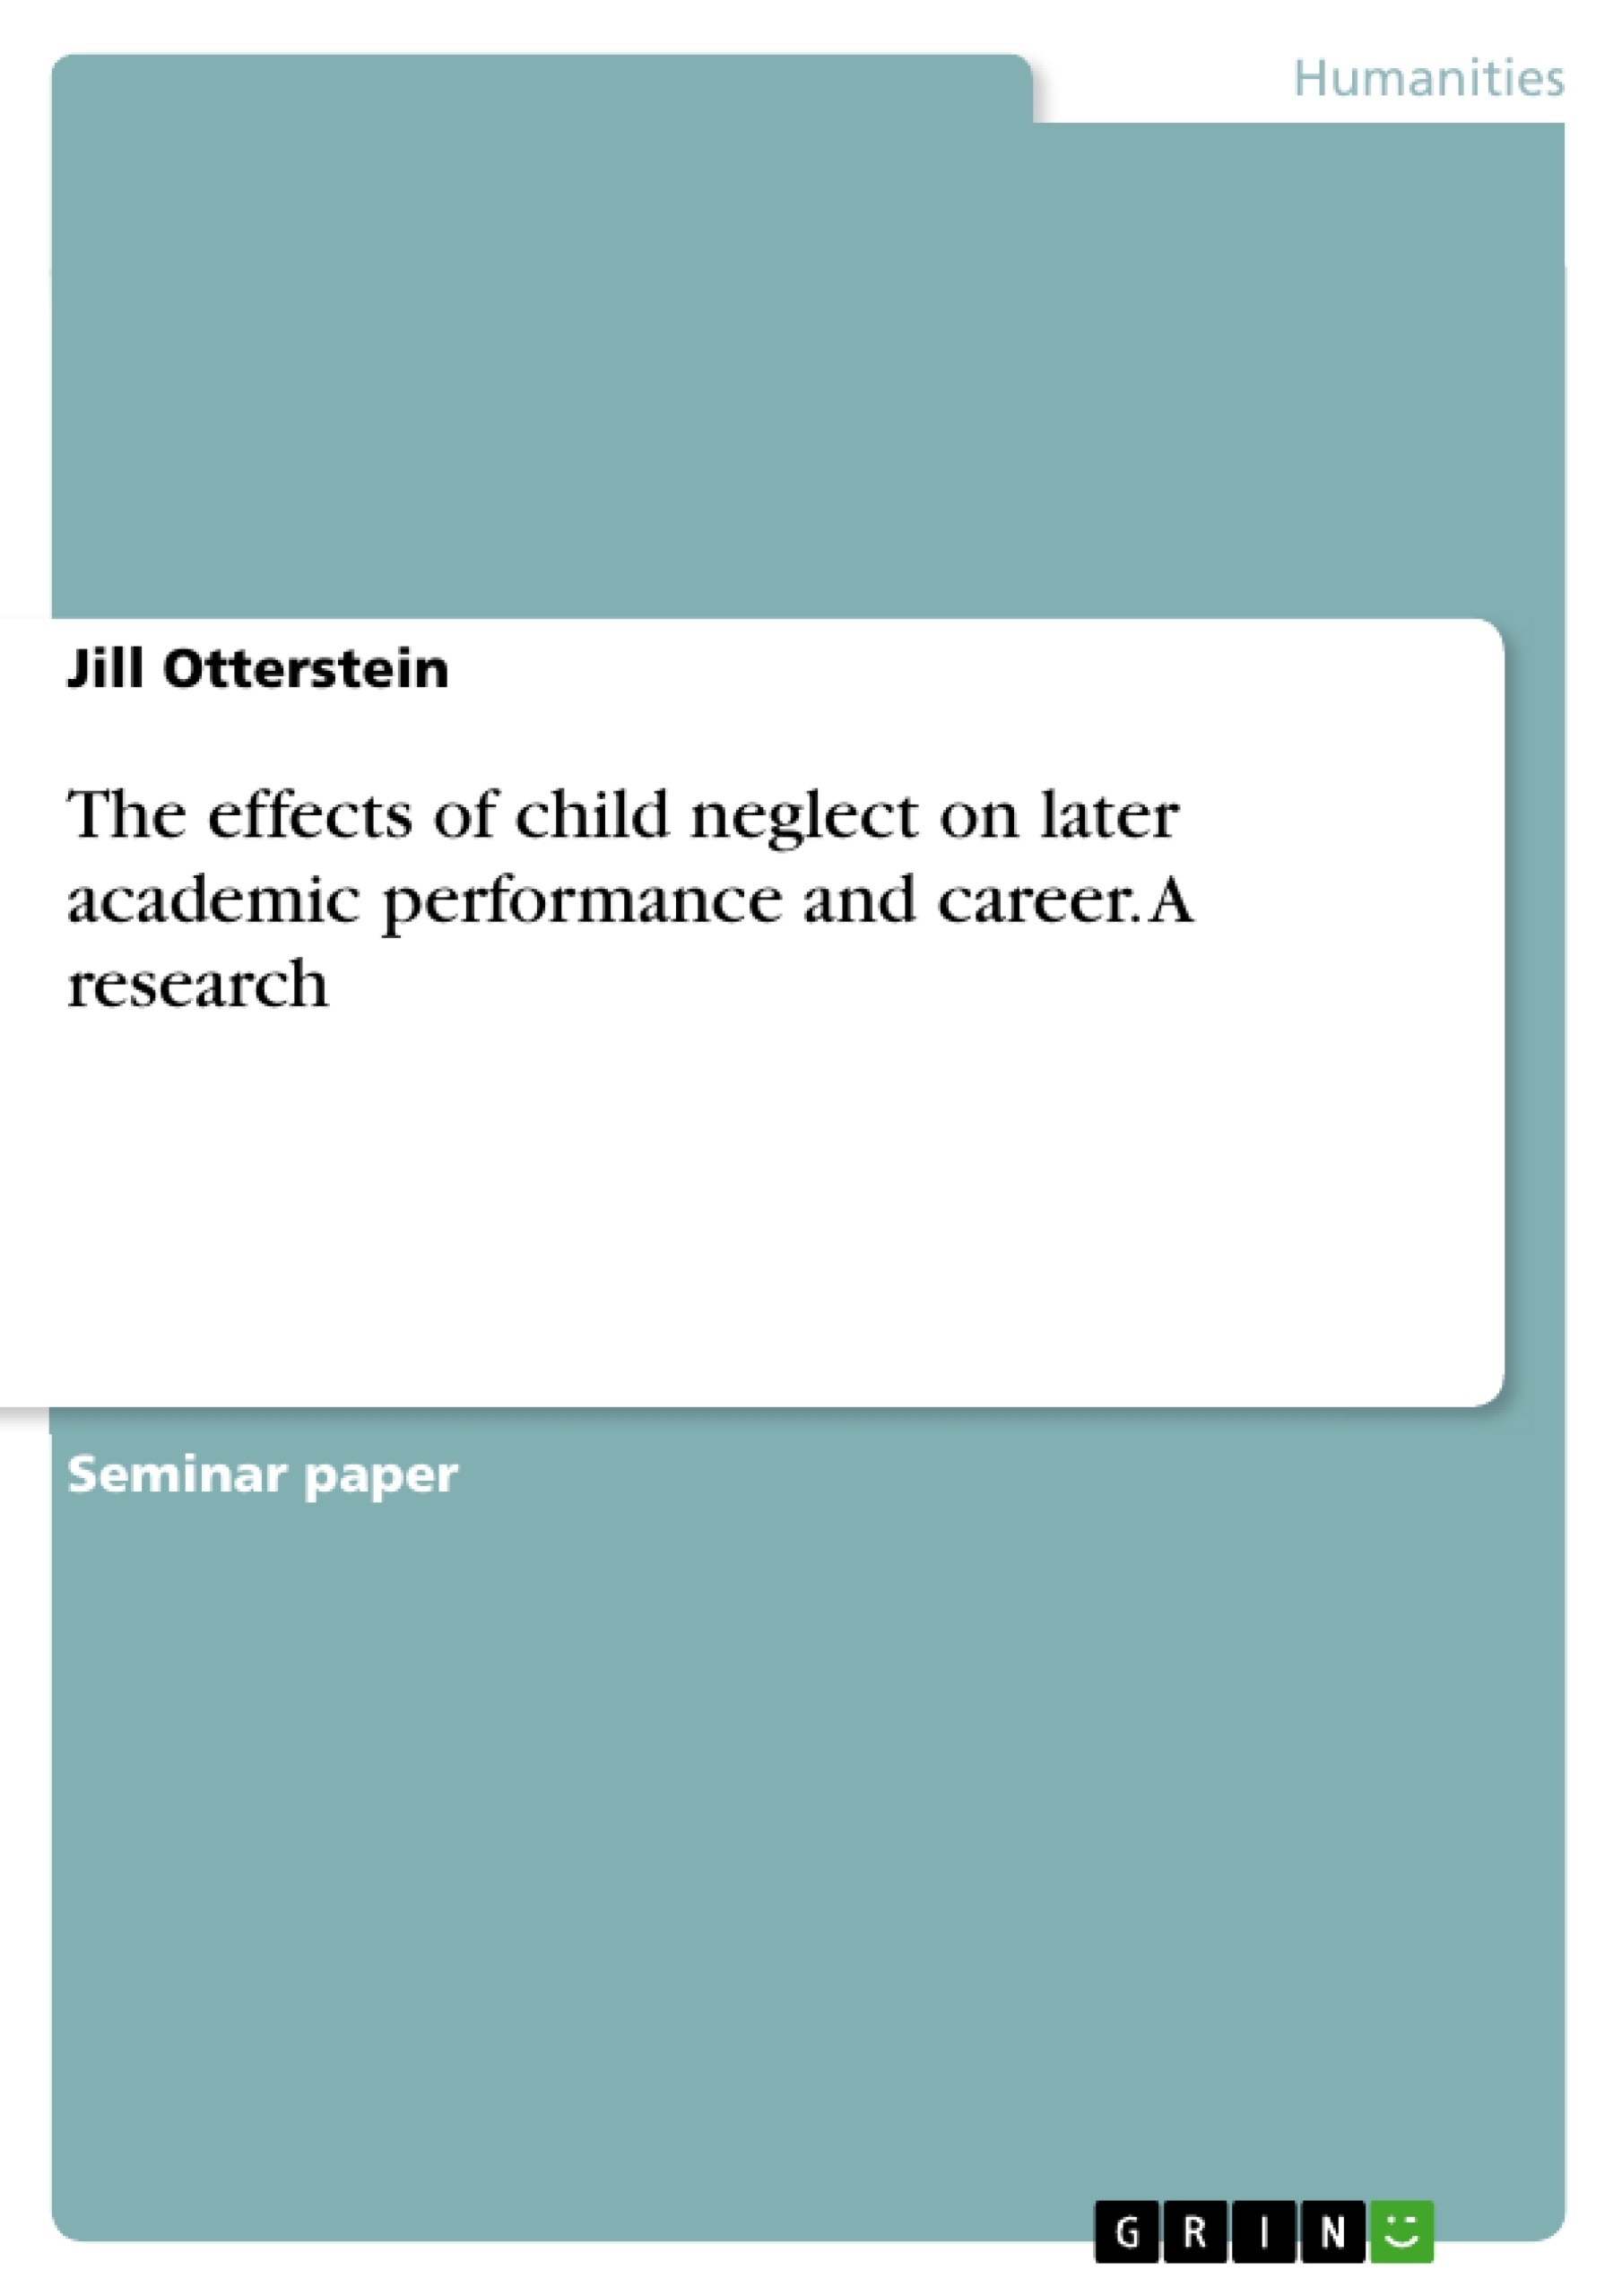 Title: The effects of child neglect on later academic performance and career. A research